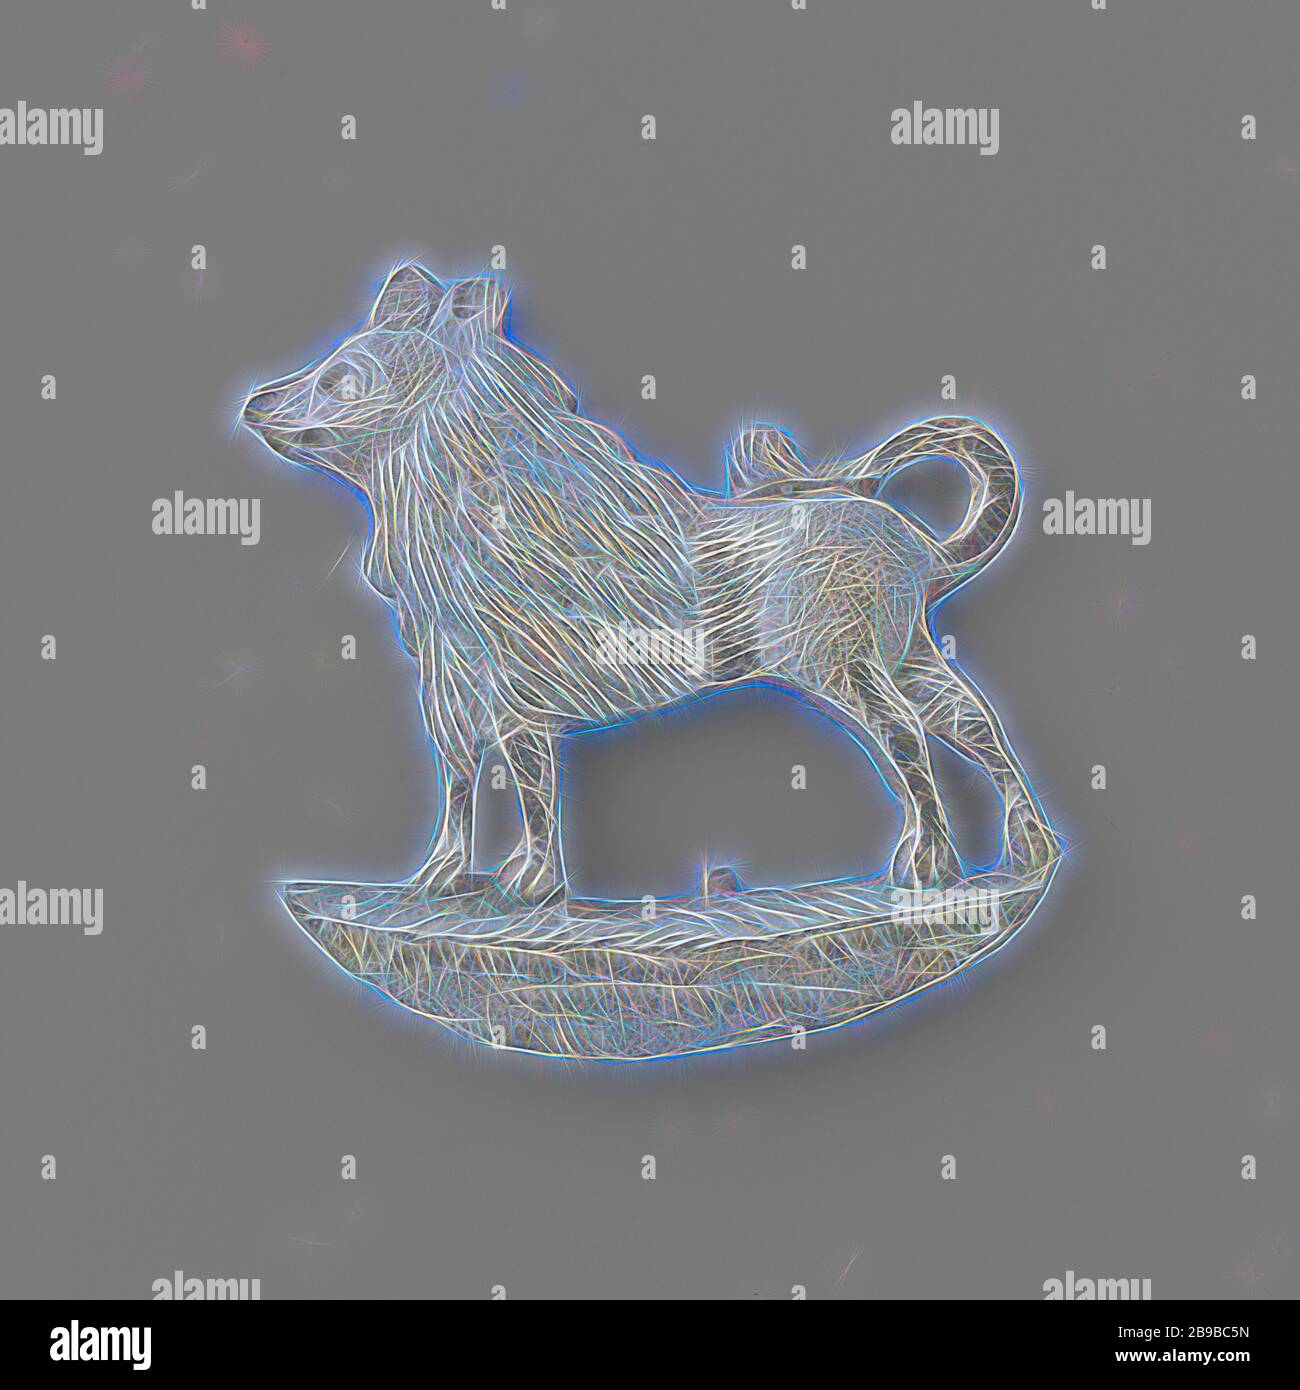 Keeshondje, one-sided silver openwork plaque, presenting dog with pointed mouth, furry head and neck with mane, smooth abdomen and long tail flared, hanging back on back with loop, standing on crescent-shaped background, dog, anonymous, Netherlands, 1784 - 1787, silver (metal), l 1.9 cm × w 2 cm × w 1.55 gr, Reimagined by Gibon, design of warm cheerful glowing of brightness and light rays radiance. Classic art reinvented with a modern twist. Photography inspired by futurism, embracing dynamic energy of modern technology, movement, speed and revolutionize culture. Stock Photo